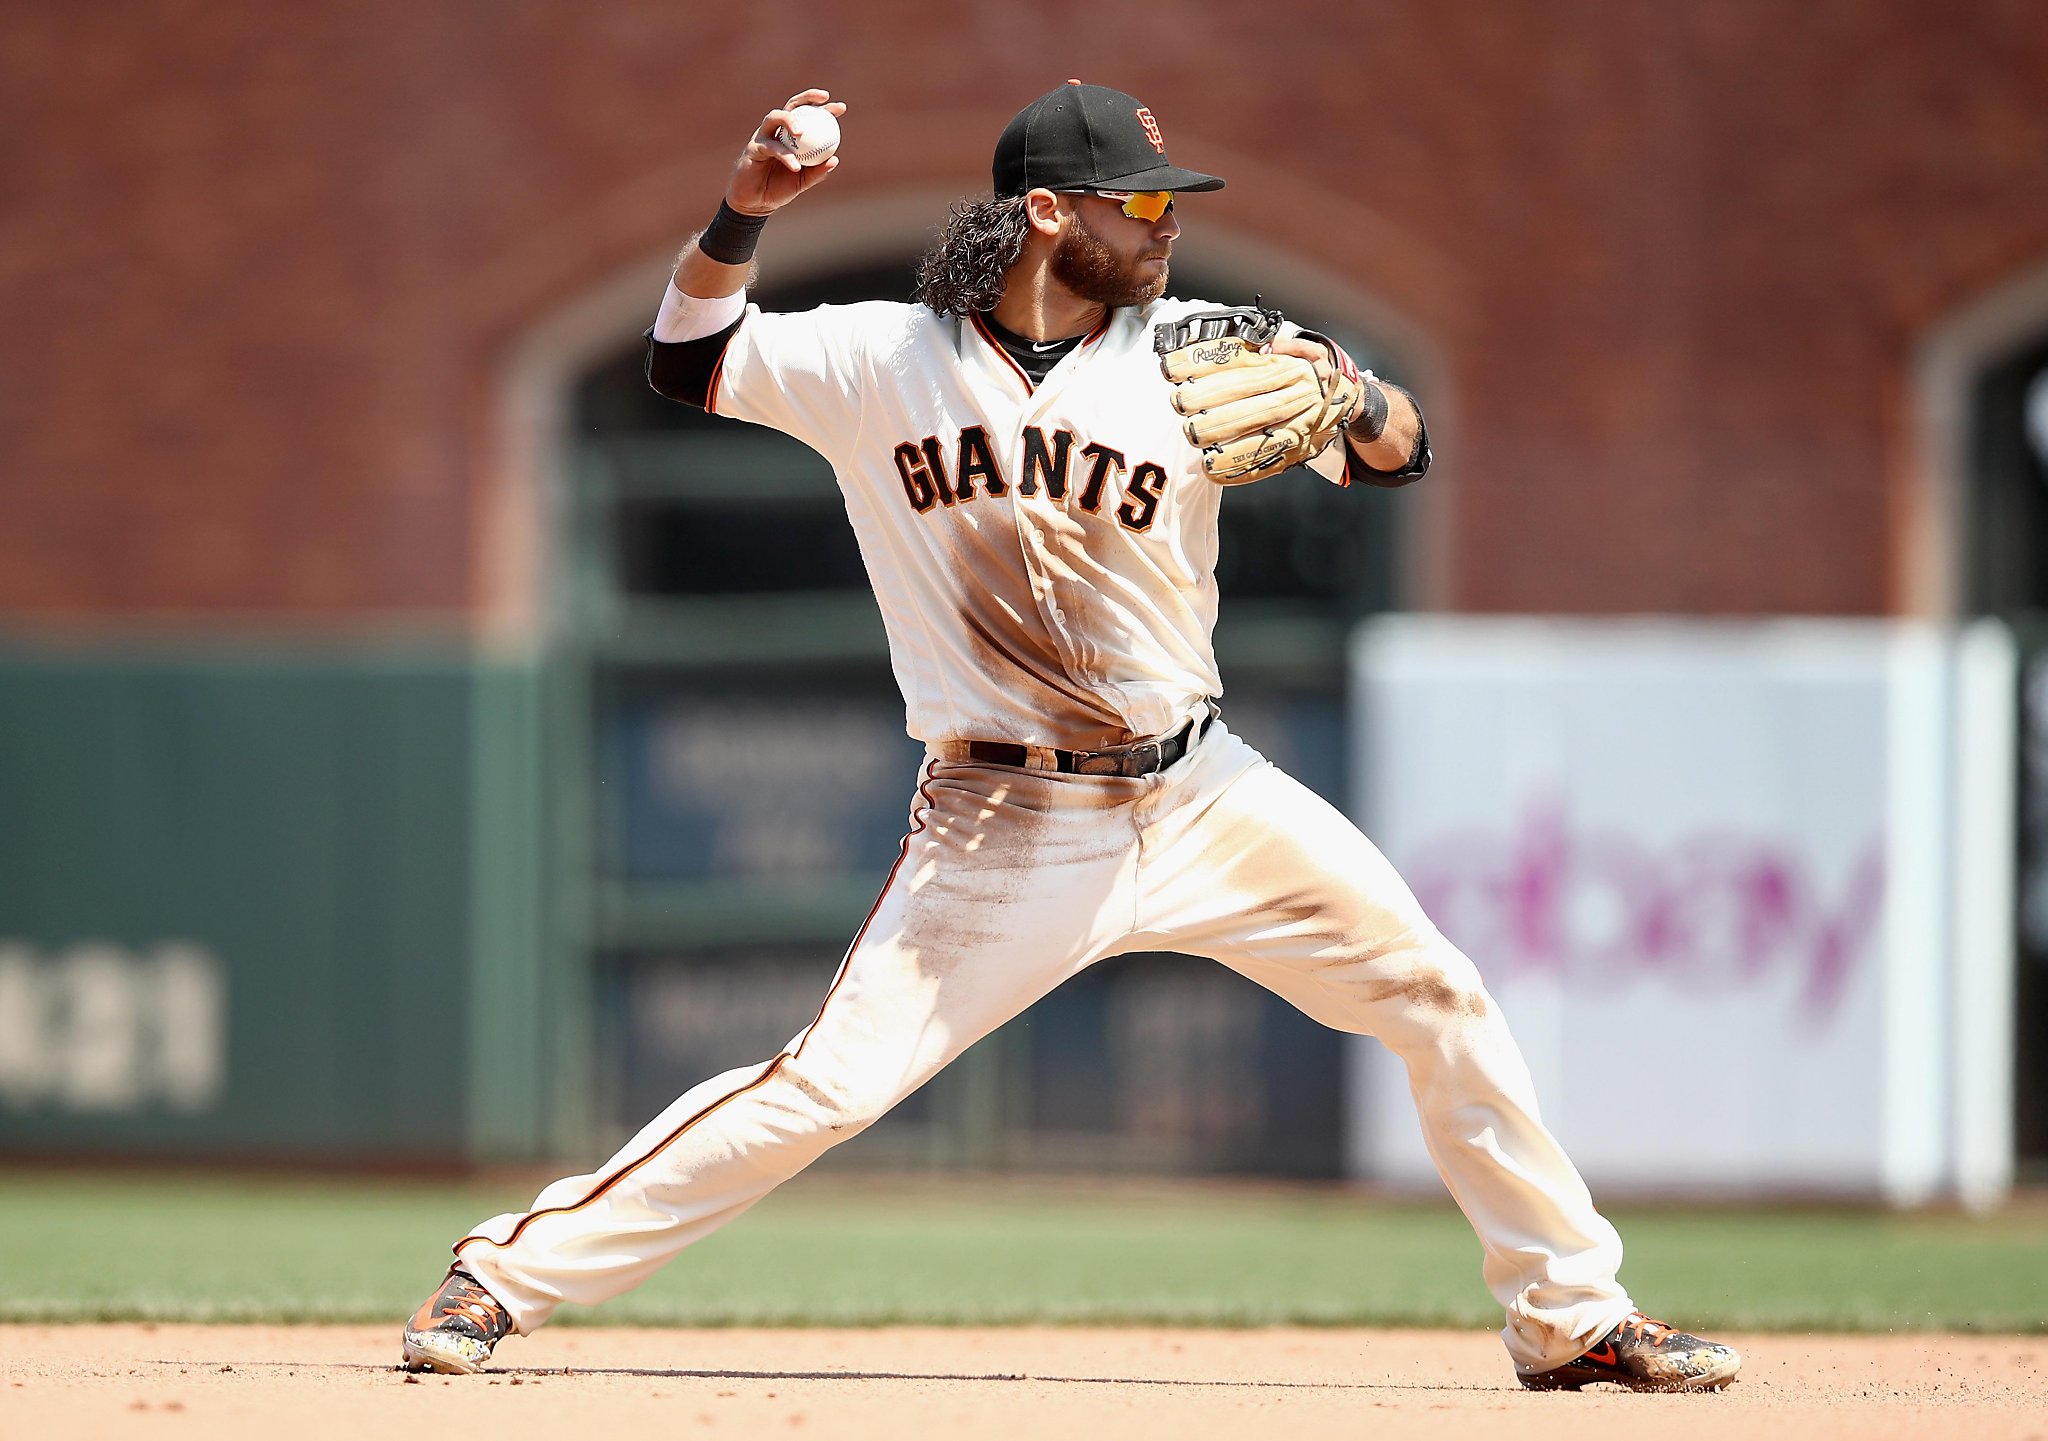 Brandon Crawford's kids get first pitch on big day for Giants star